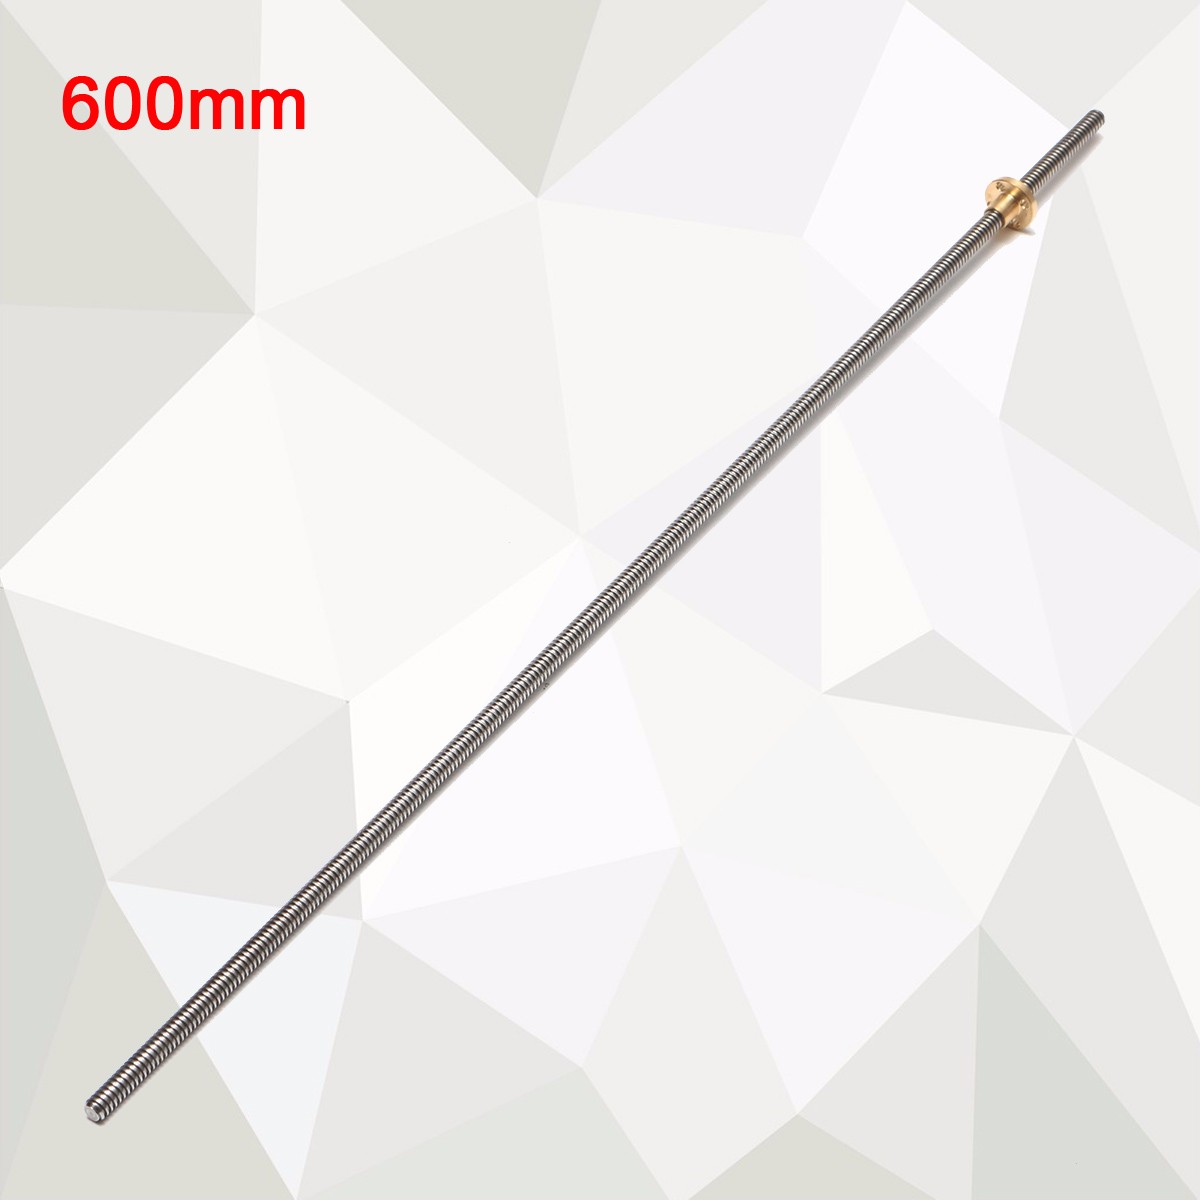 8mm 300/400/500/600mm Lead 2mm Stainless Steel Lead Screw + T8 Nut For CNC 3D Printer Reprap 14